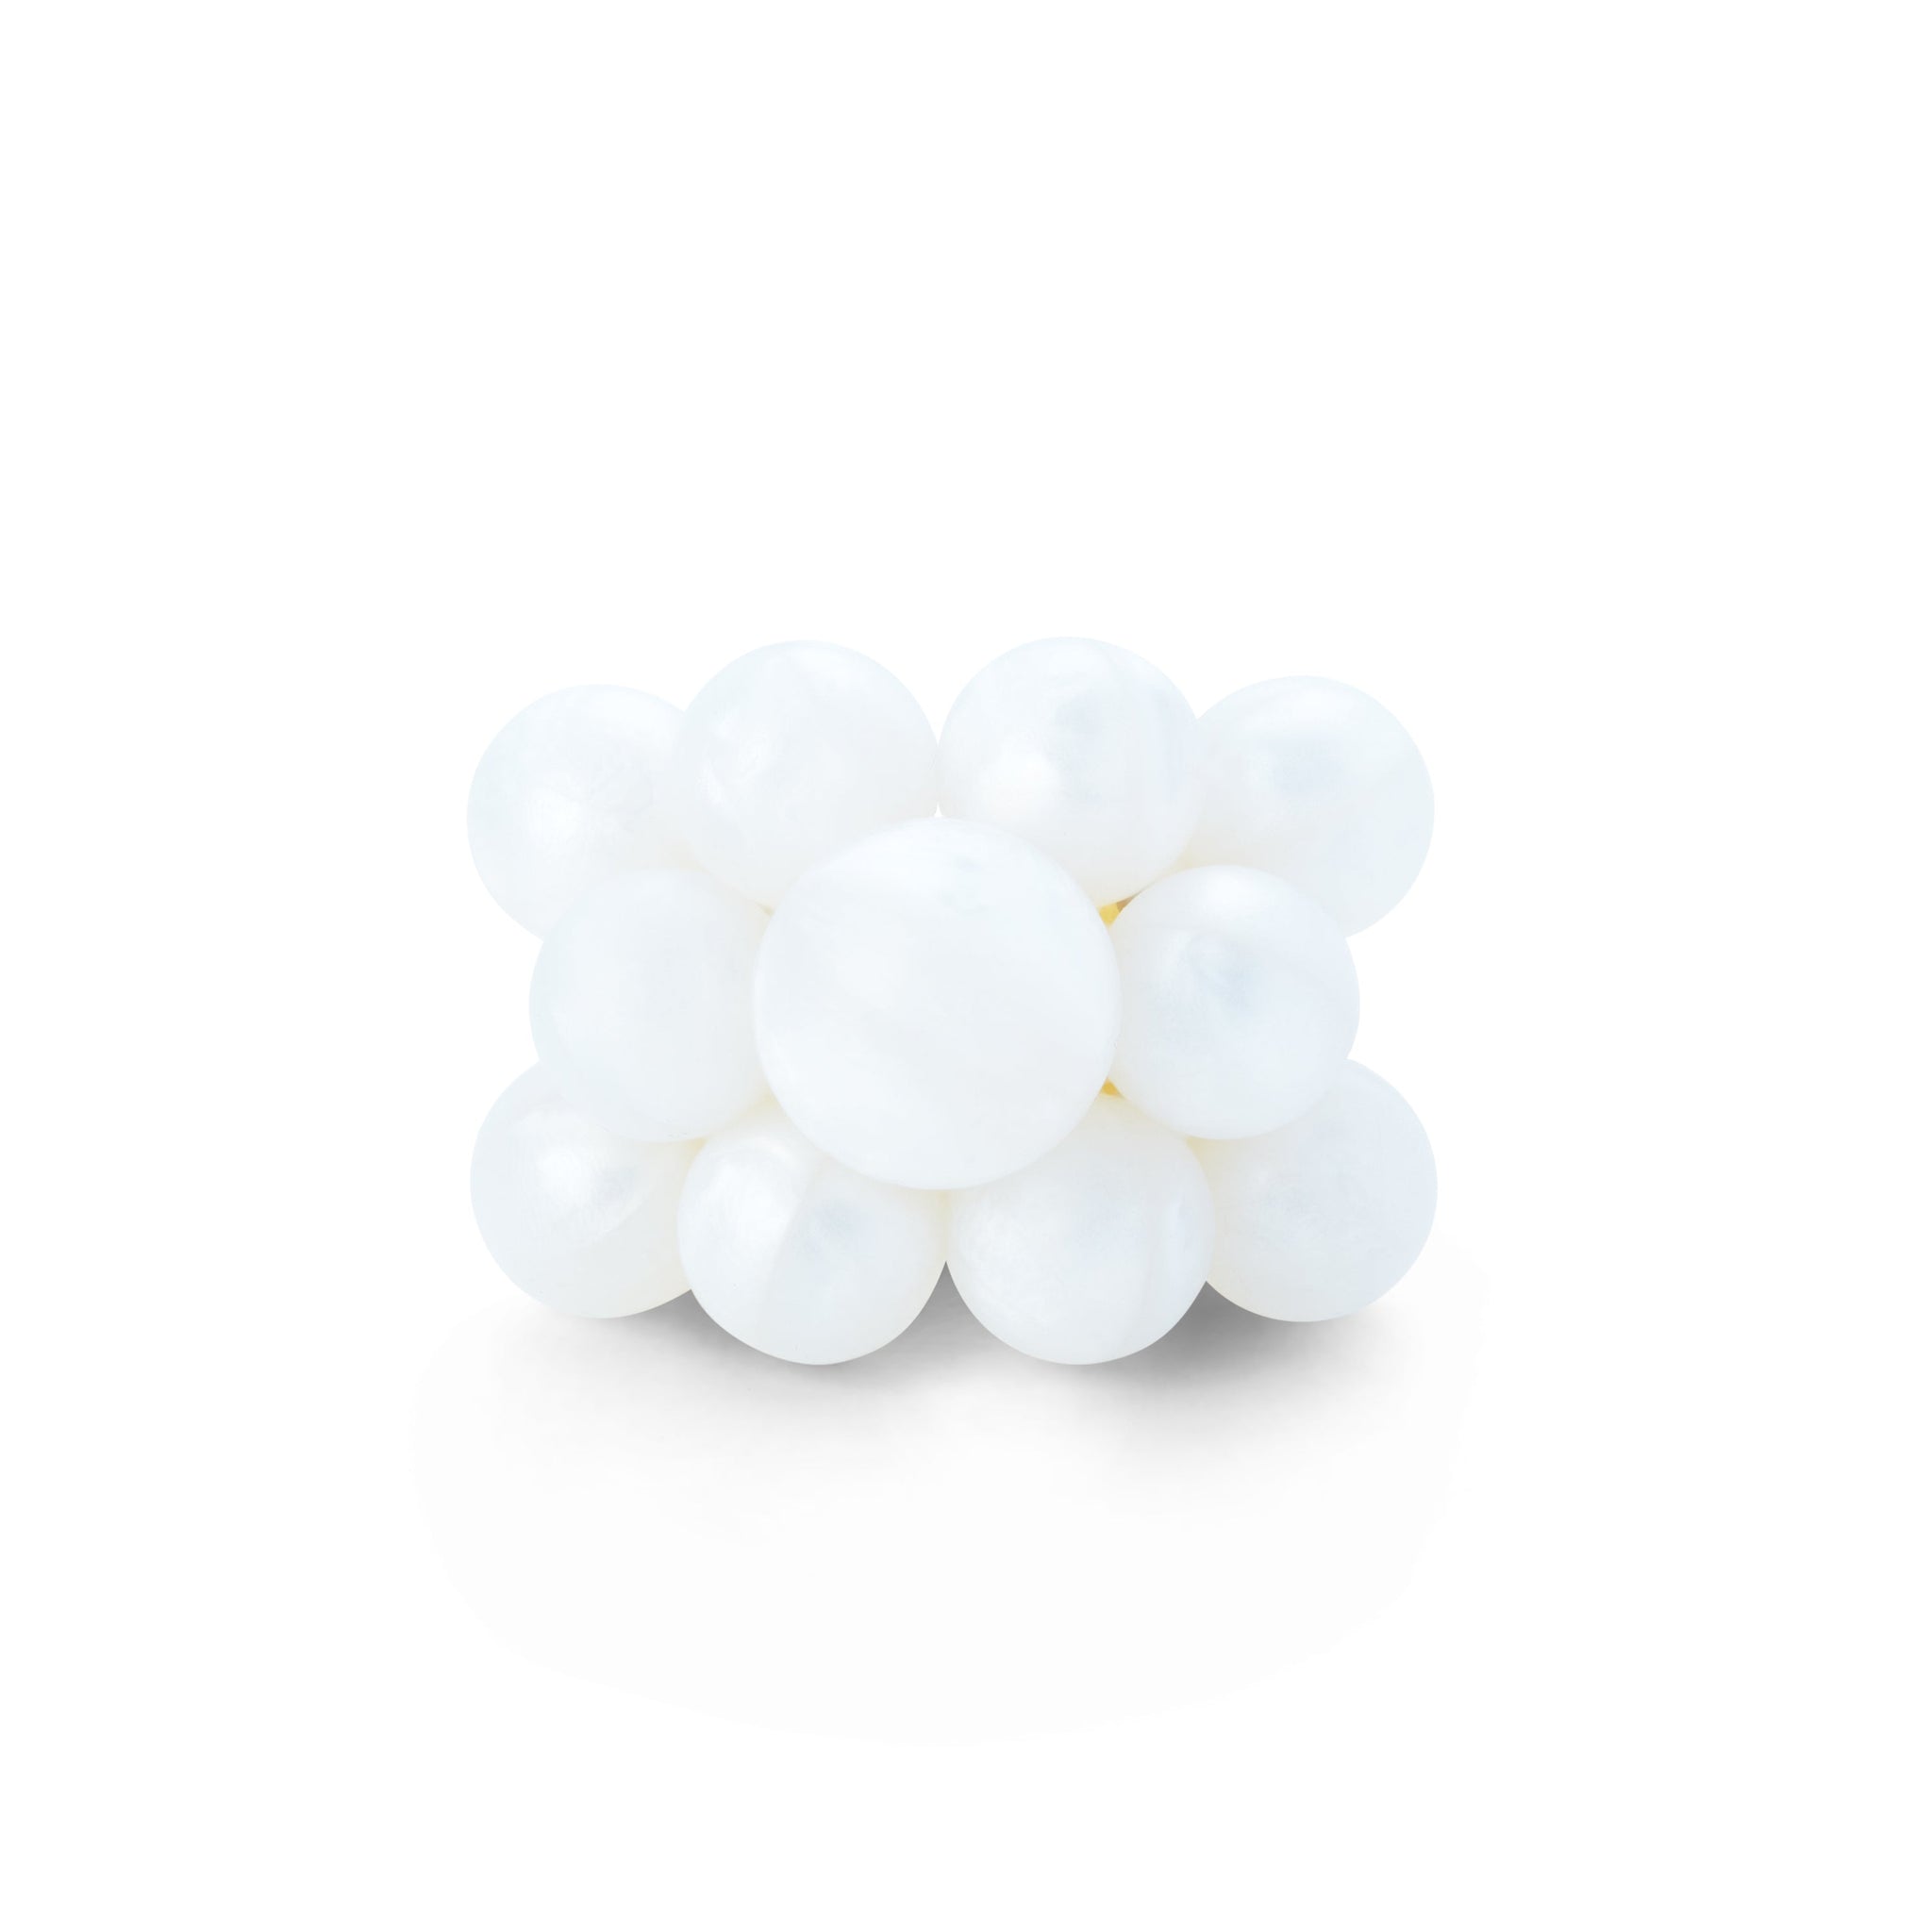 Madame Palm cocktail ring self-love in silicone pearls and white gold 18kt band